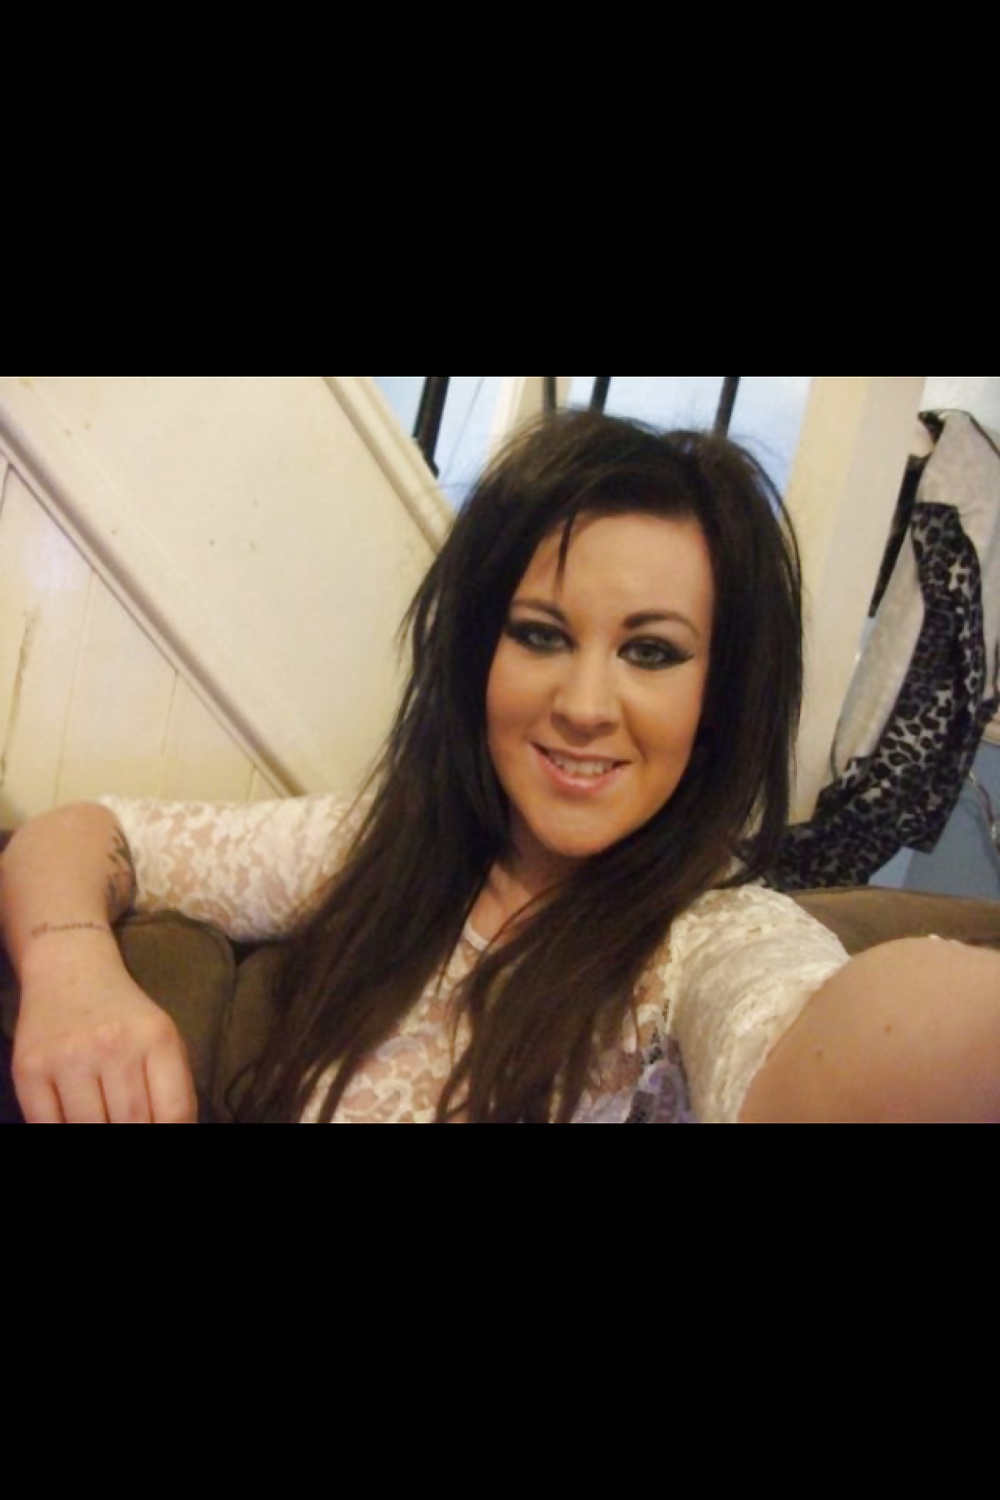 Porn image Dirty teen chav slut Lizzy from Plymouth England UK